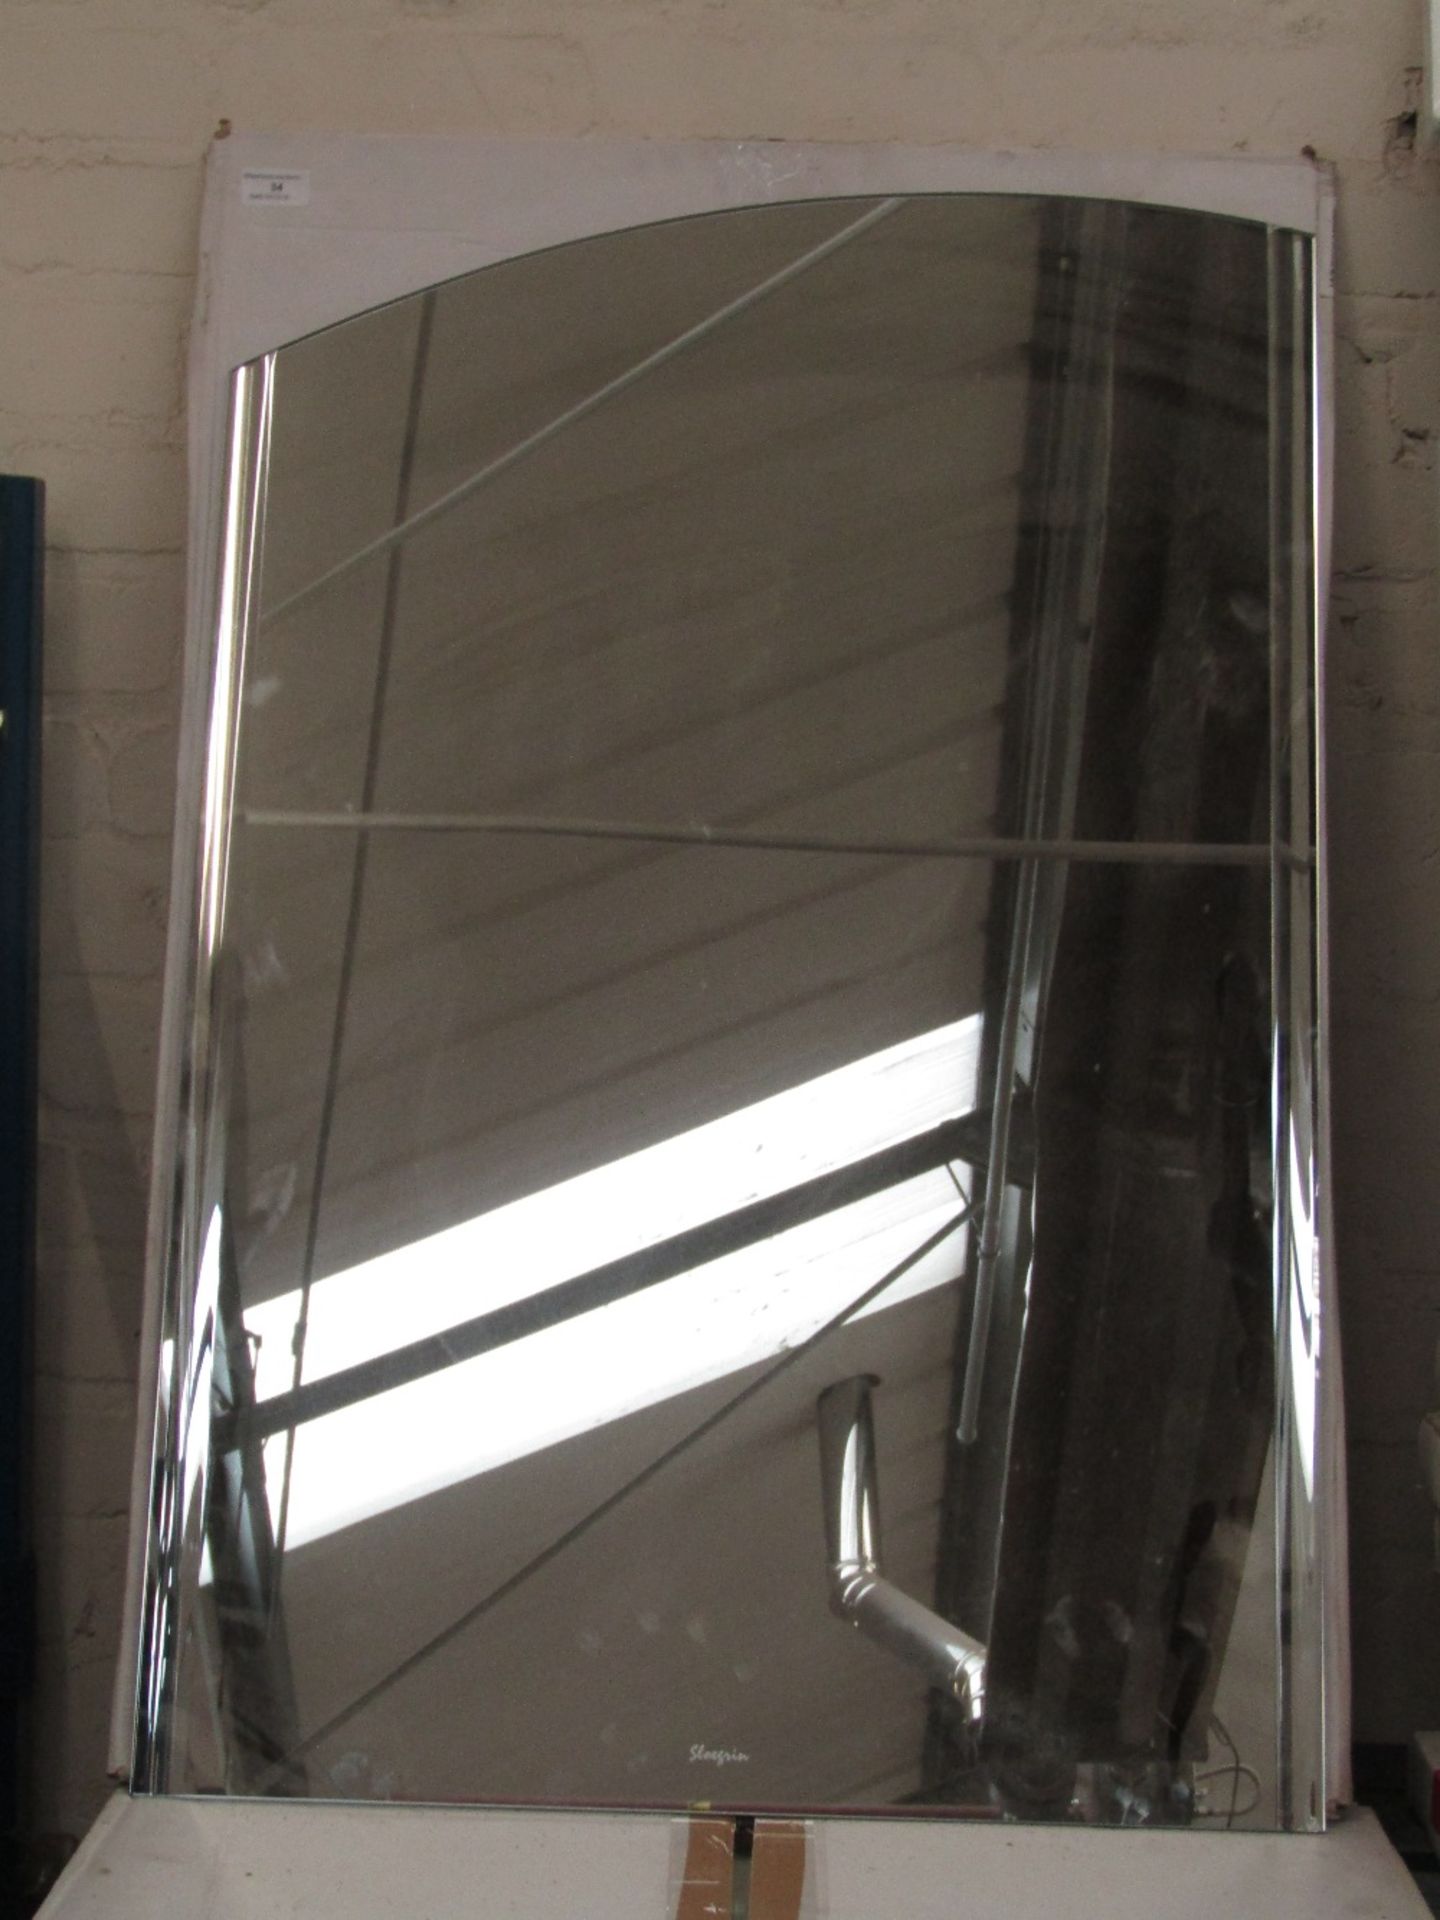 Sloegrin SLM-5002 Curved Top Mirror, 600 x 900mm. New & Boxed.